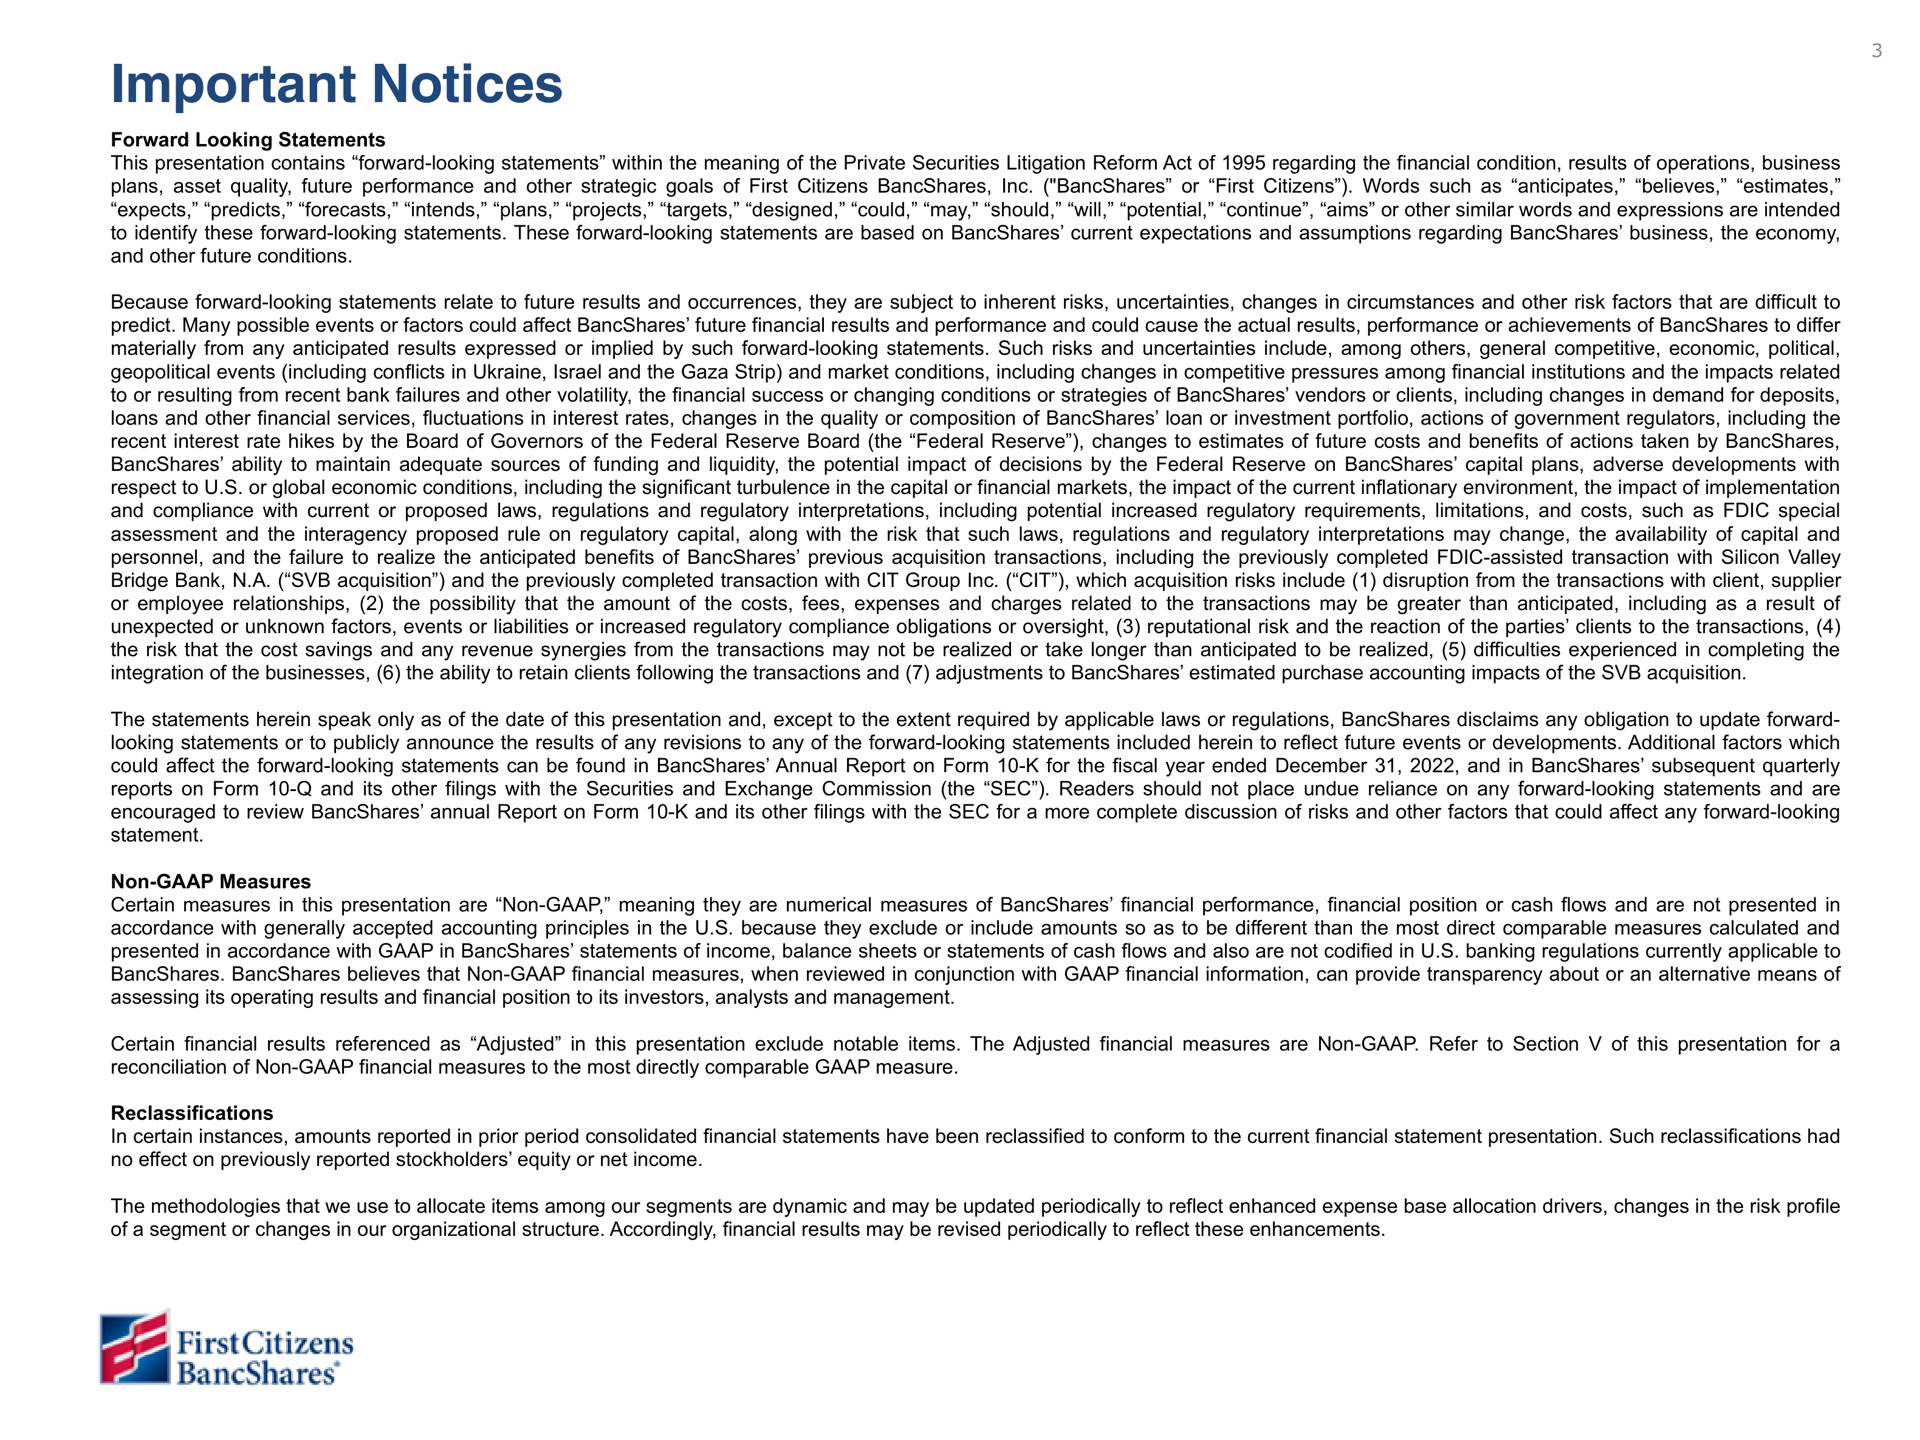 important notices | First Citizens BancShares